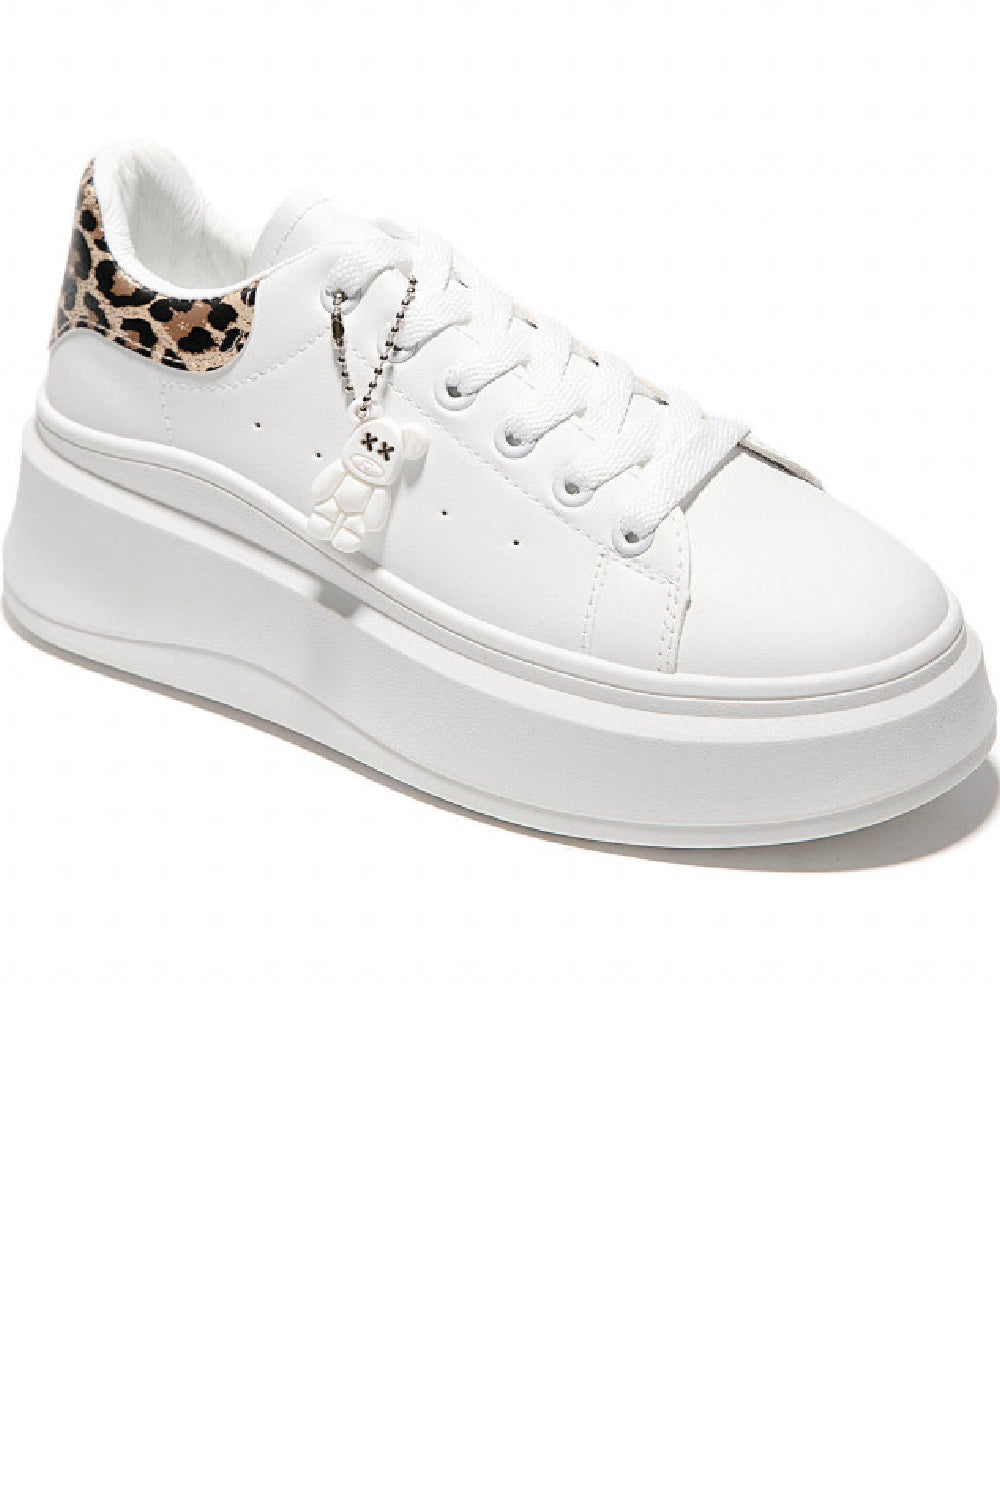 LEOPARD LACE UP TAB DETAIL CHUNKY FLAT TRAINERS SNEAKERS